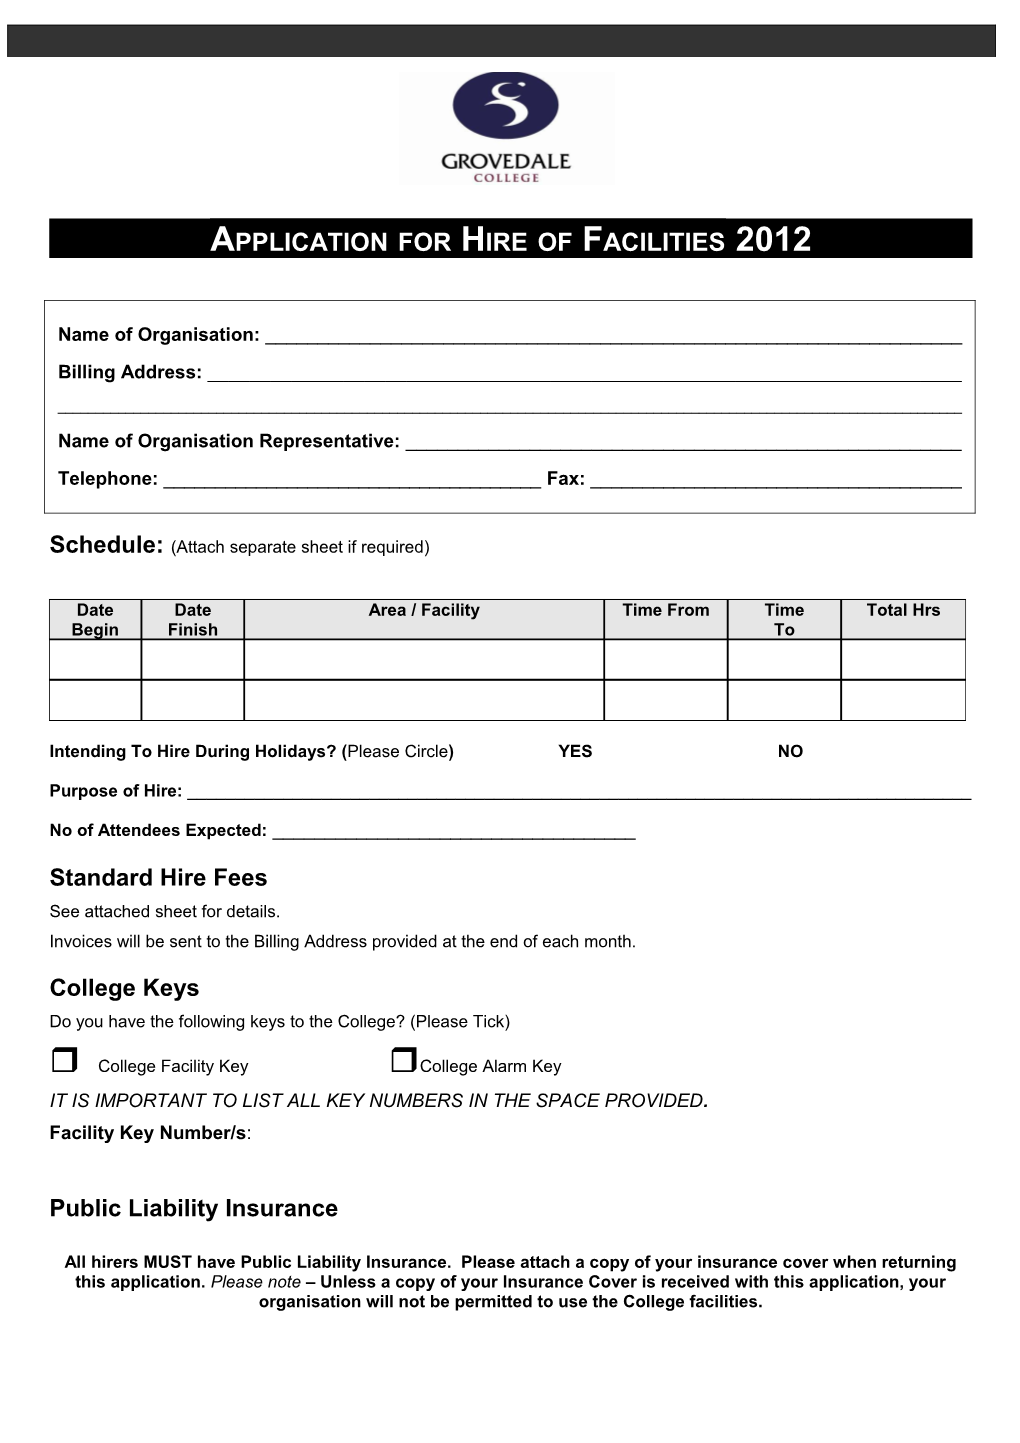 Application for Hire of Facilities